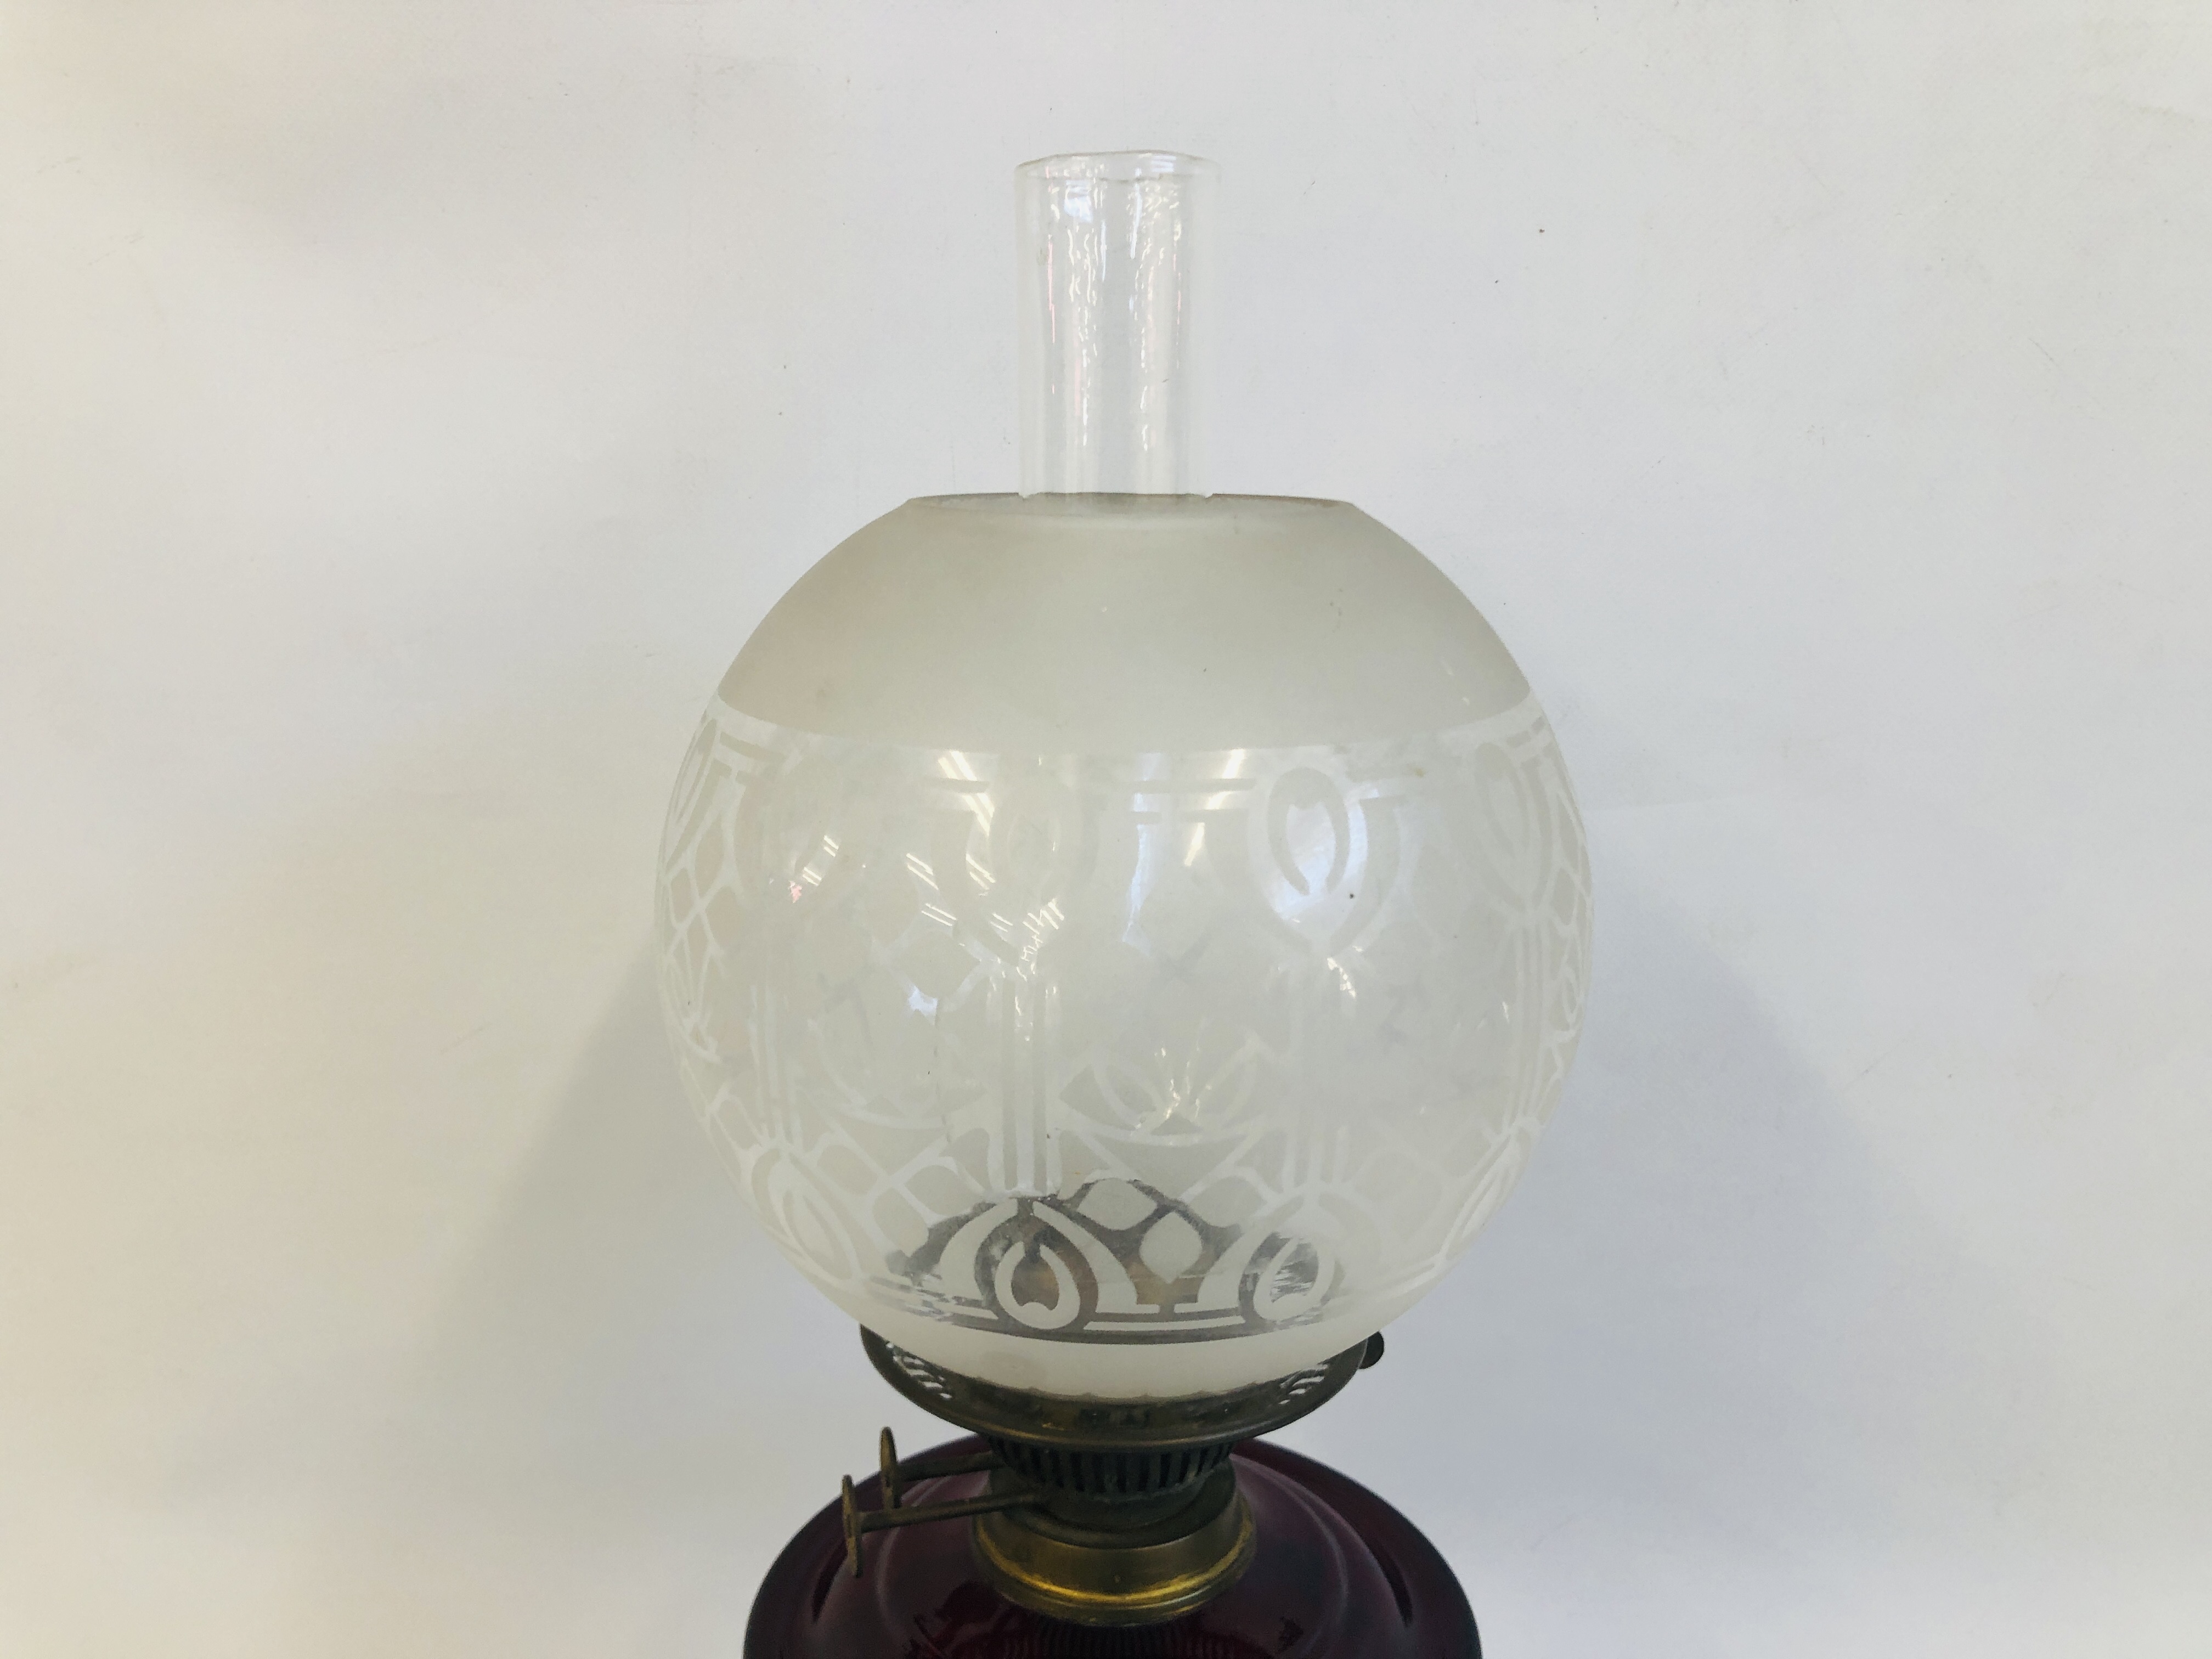 VINTAGE OIL LAMP, DECORATIVE CAST BASE RUBY RED FONT AND ETCHED GLASS SHADE HEIGHT 55CM. - Image 4 of 5